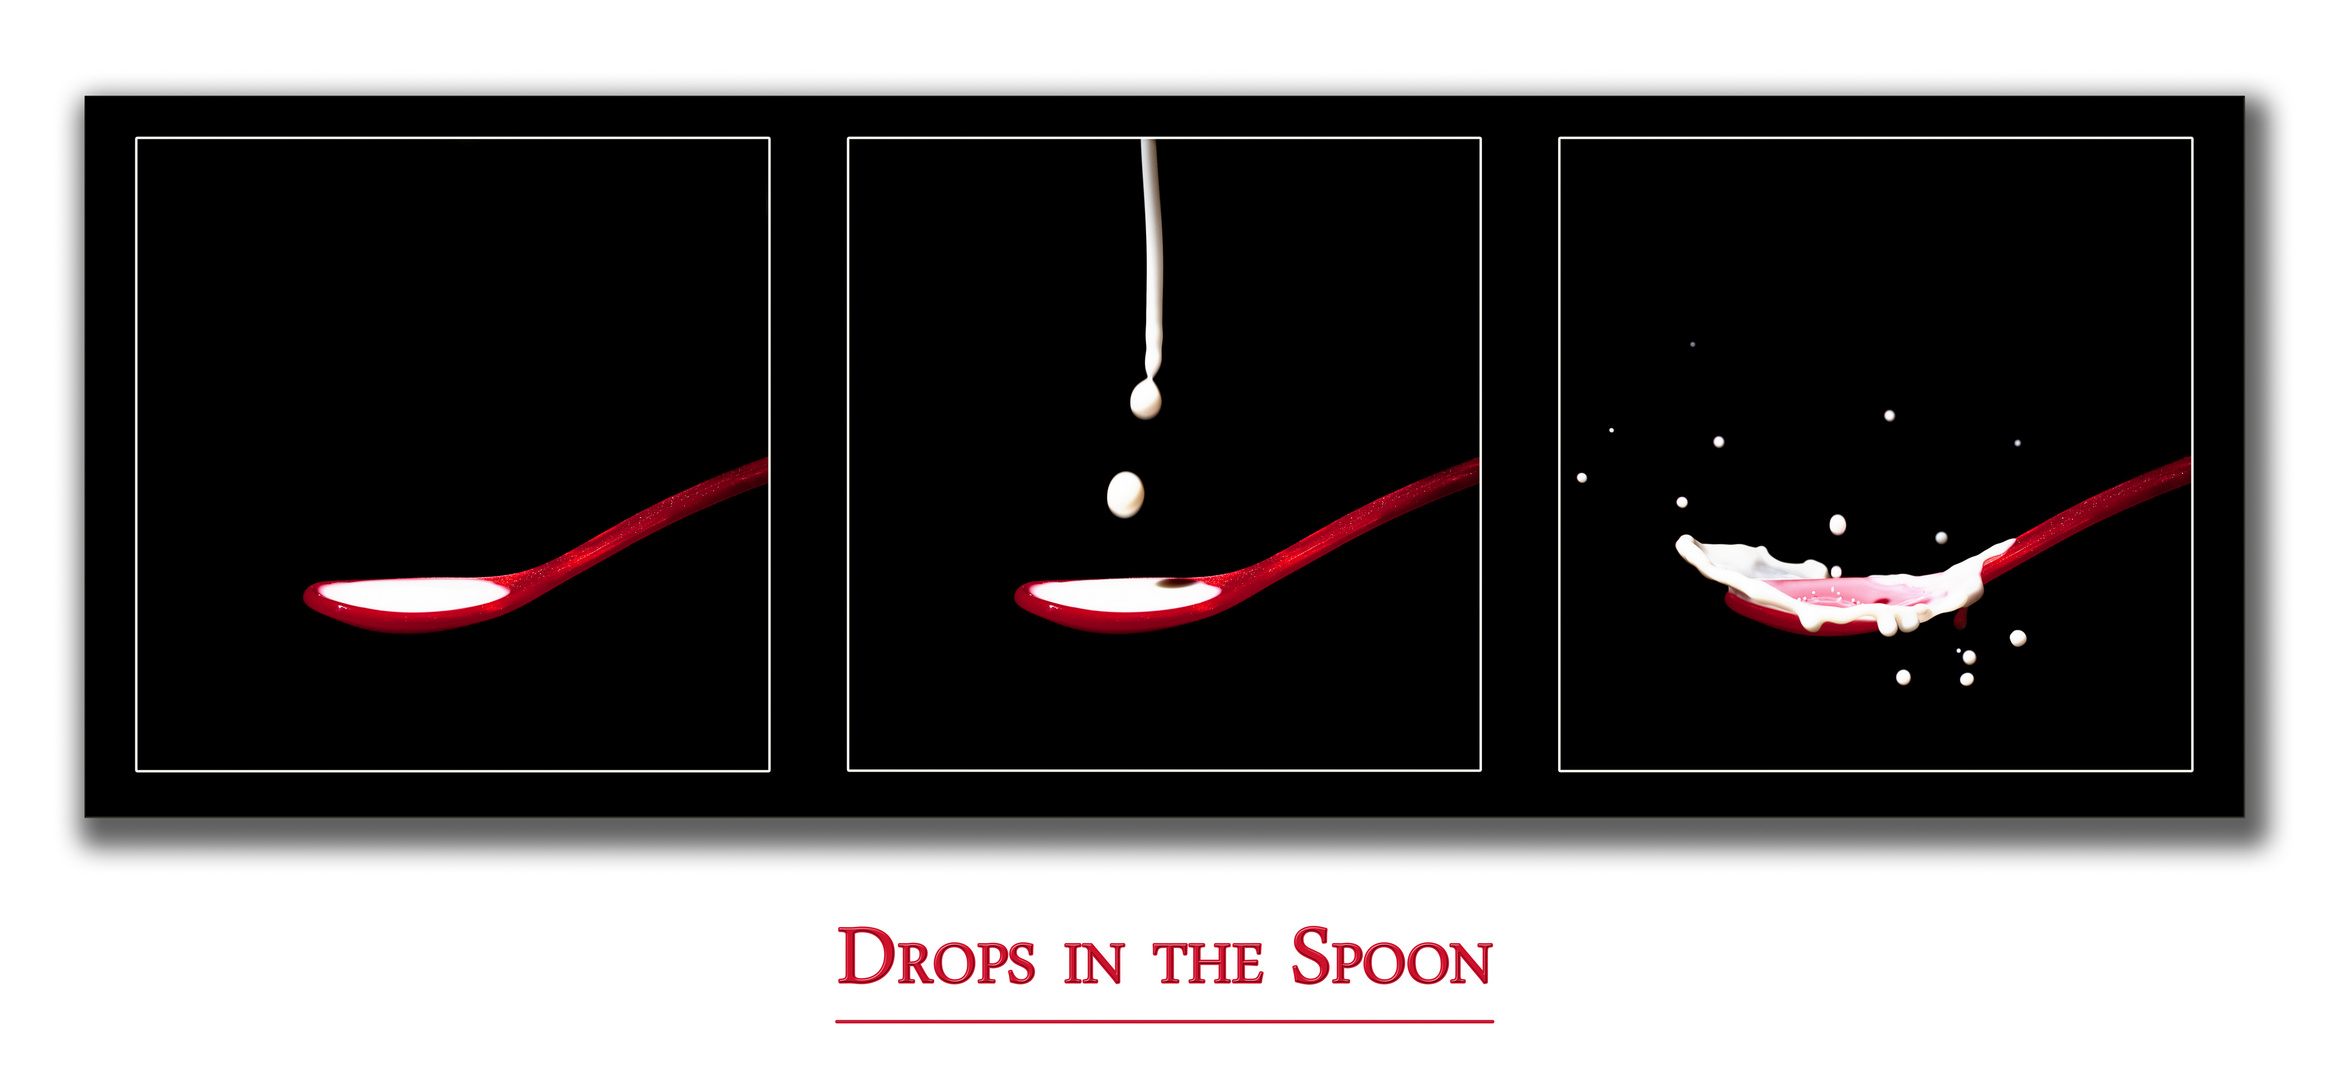 Drops in the Spoon